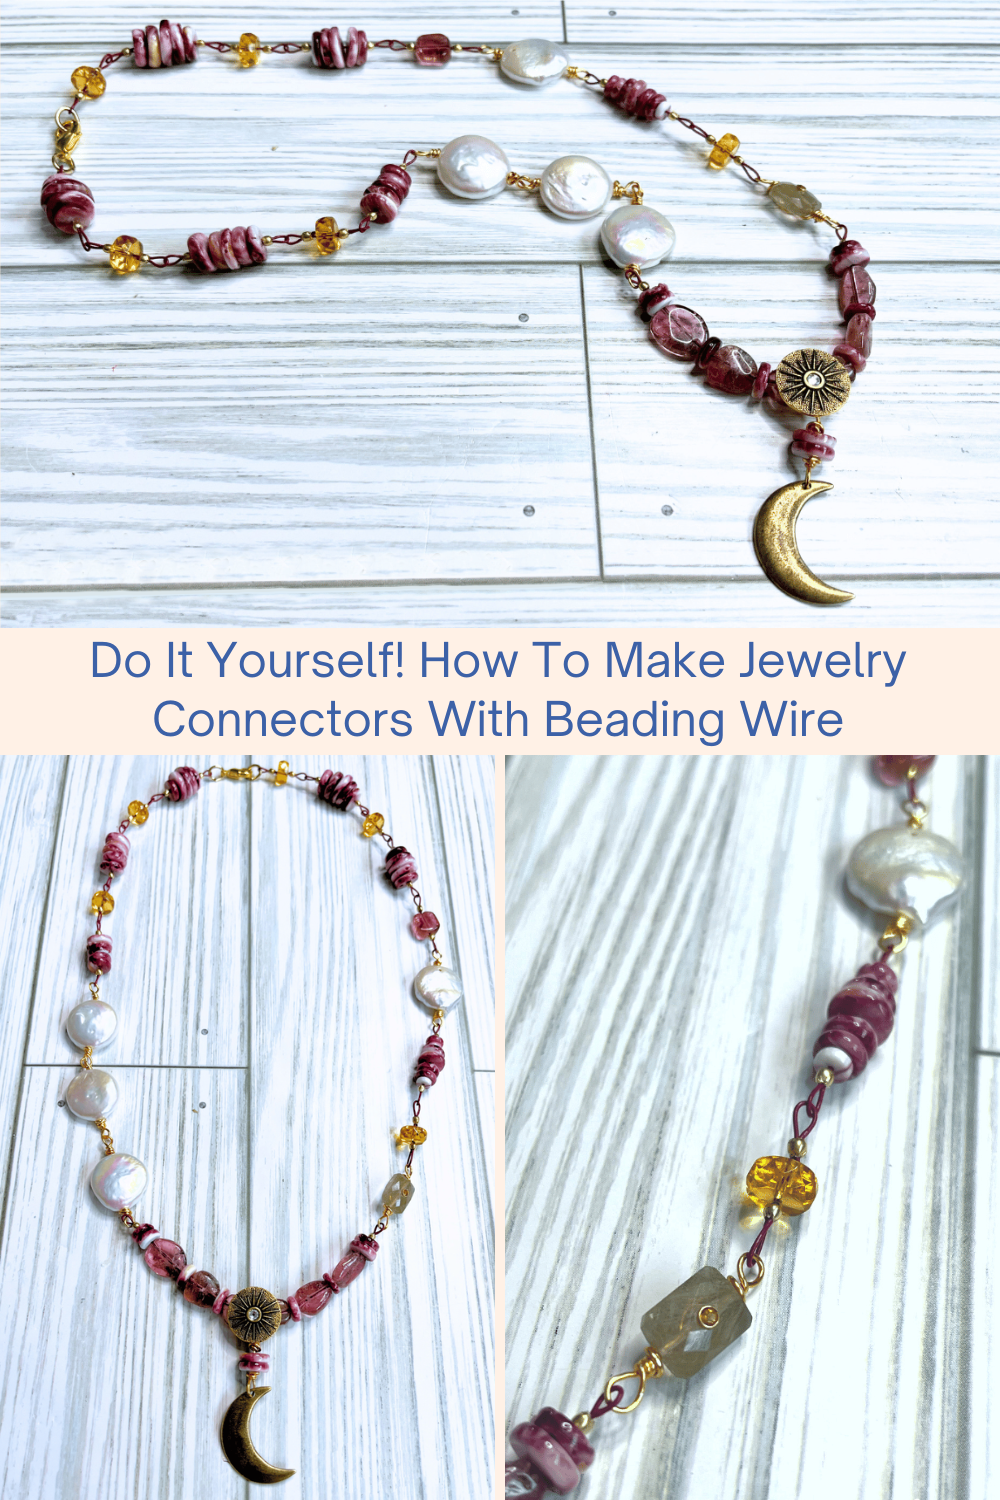 Do It Yourself! How To Make Jewelry Connectors With Beading Wire Collage